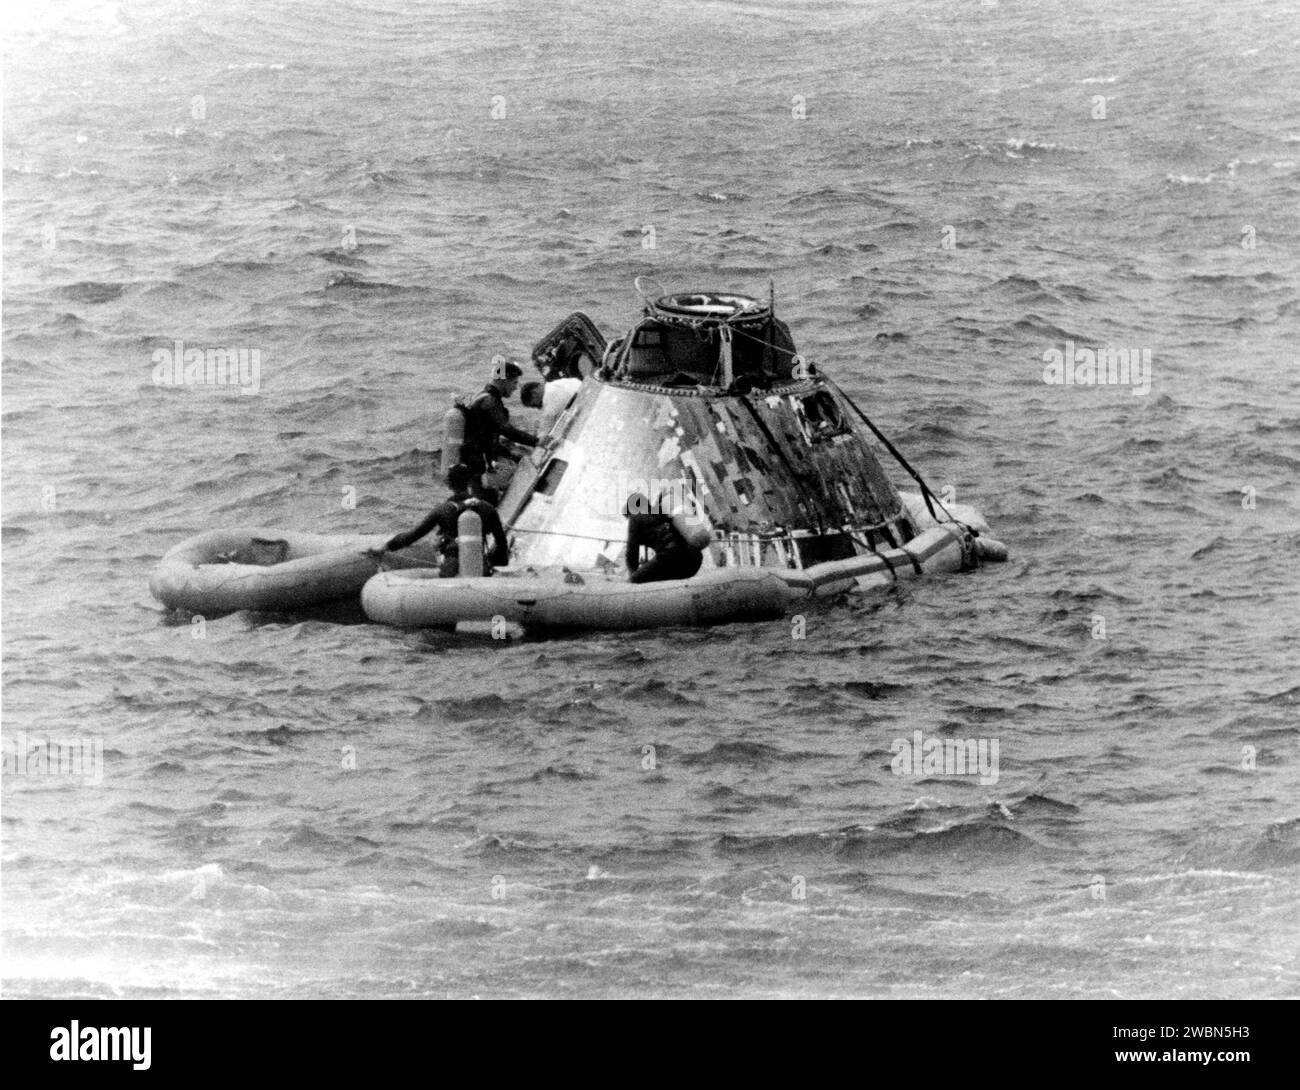 KENNEDY SPACE CENTER, FLA. -- Pararescueman helps Apollo 9 Command Module Pilot David R. Scott from the spacecraft today during recovery at completion of the 10-day Earth orbital flight with James A. McDivitt and Russell L. Schweickart, still in the spacecraft. The astronauts splashed down less than five miles from the USS Guadalcanal, prime recovery ship, at the beginning of their 152nd revolution. During the highly successful flight, they extensively tested the lunar module spacecraft, paving the way for a similar one to carry Americans to the Moon later this year. They were lalunched March Stock Photo